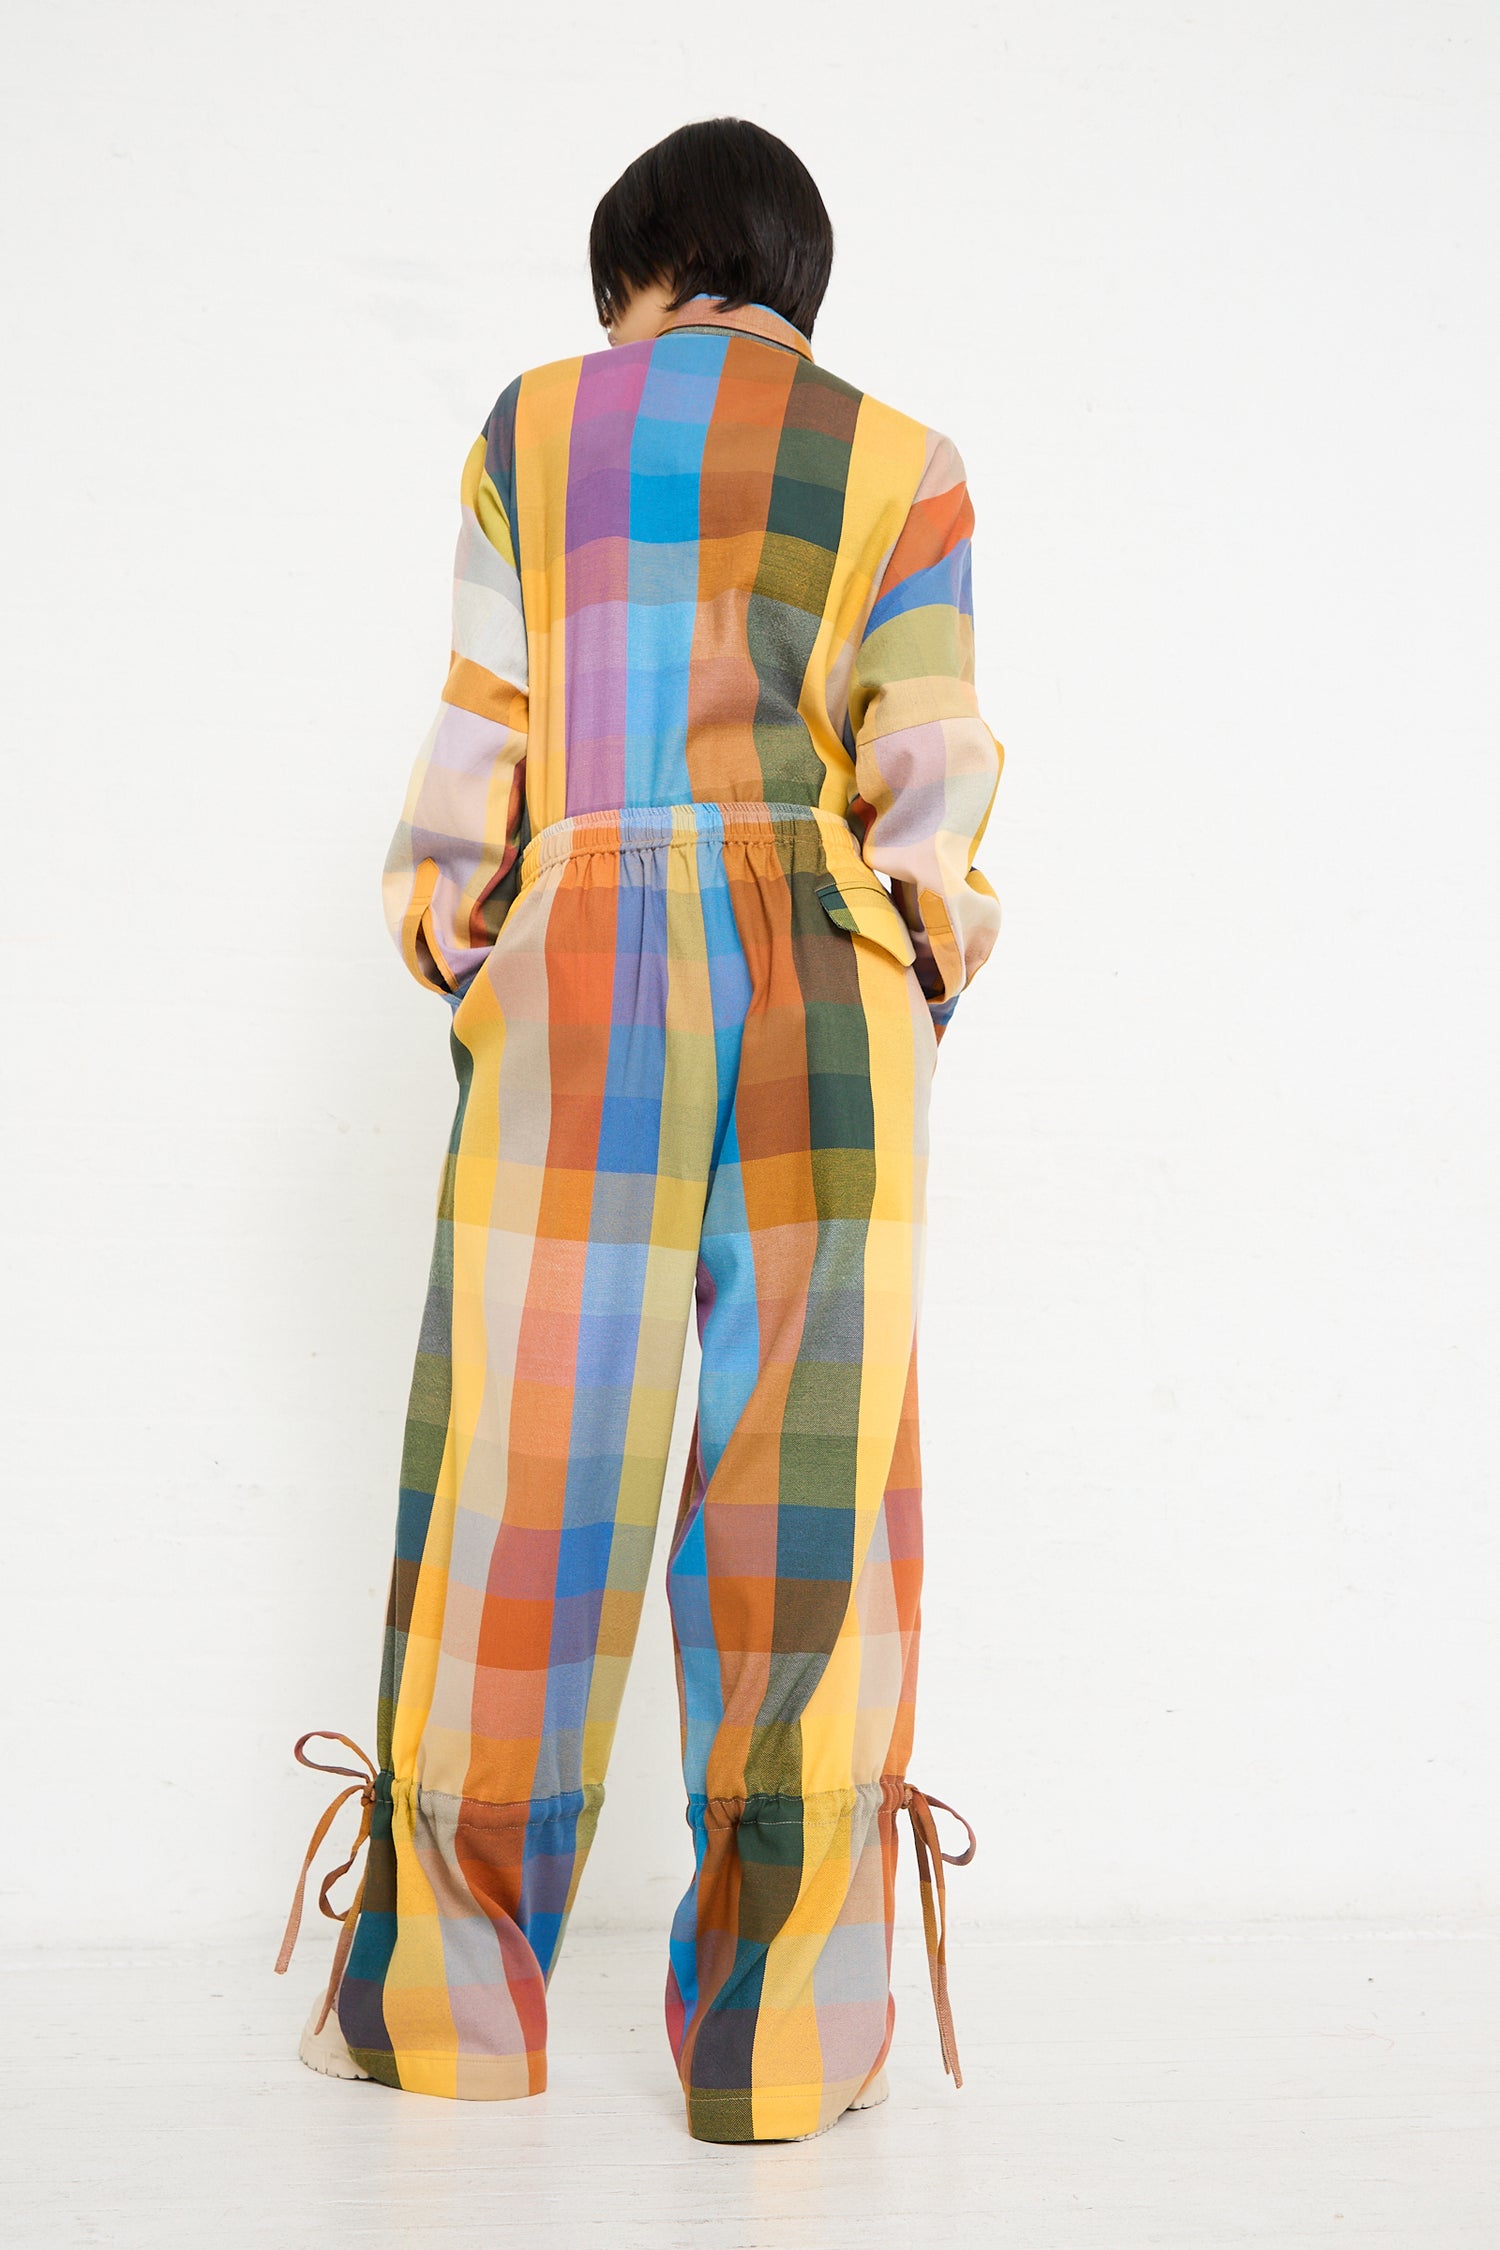 A person standing with their back to the camera, wearing a colorful striped outfit designed by Marrakshi Life with an elastic waist and tie details at the ankles, highlighting an oversized Parachute Pant in Multi Check fit.